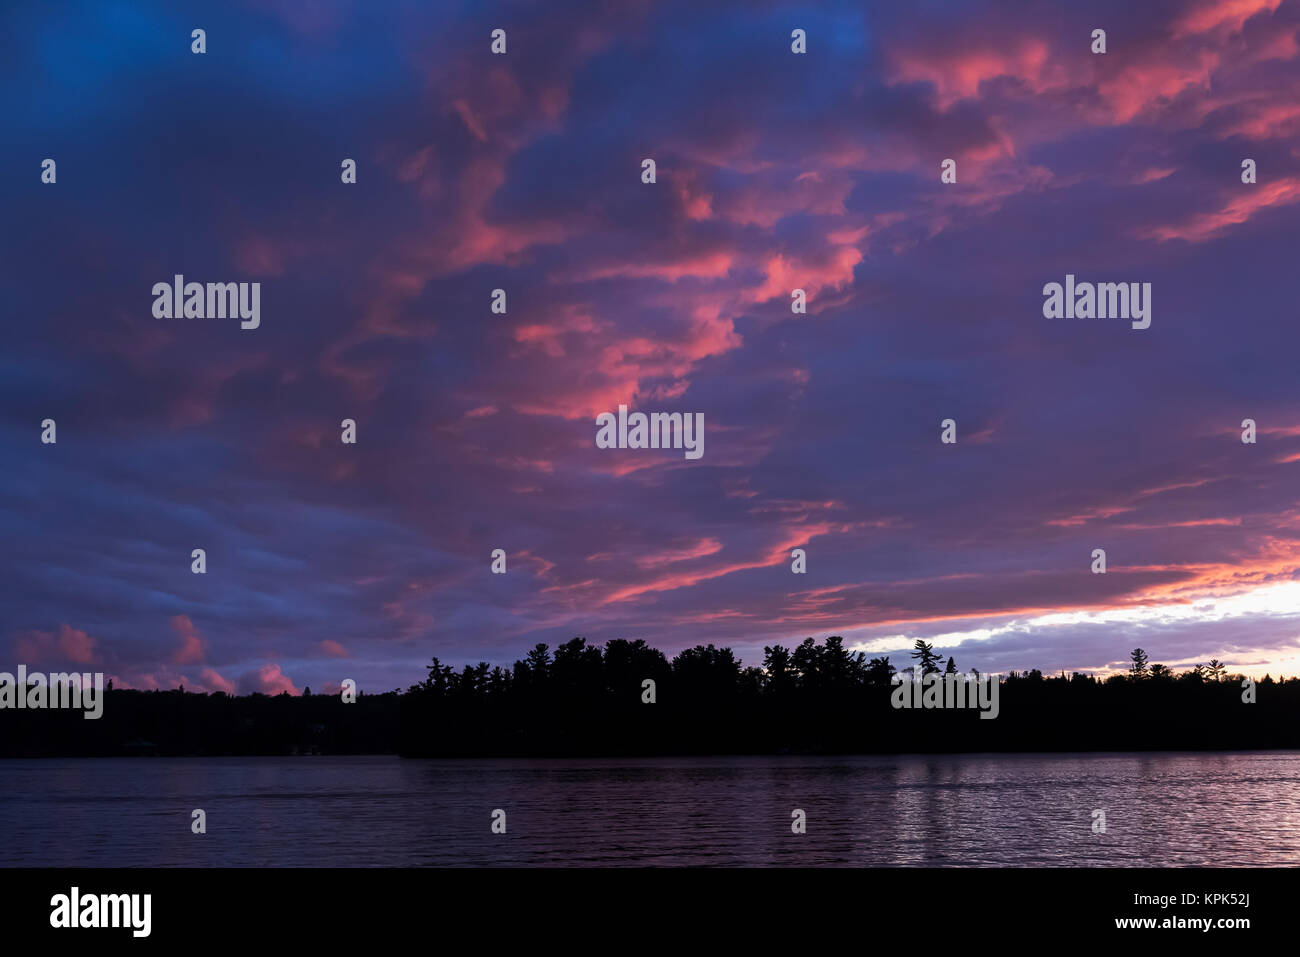 Pink clouds glowing over a tranquil lake and silhouetted trees at sunset; Lake of the Woods, Ontario, Canada Stock Photo